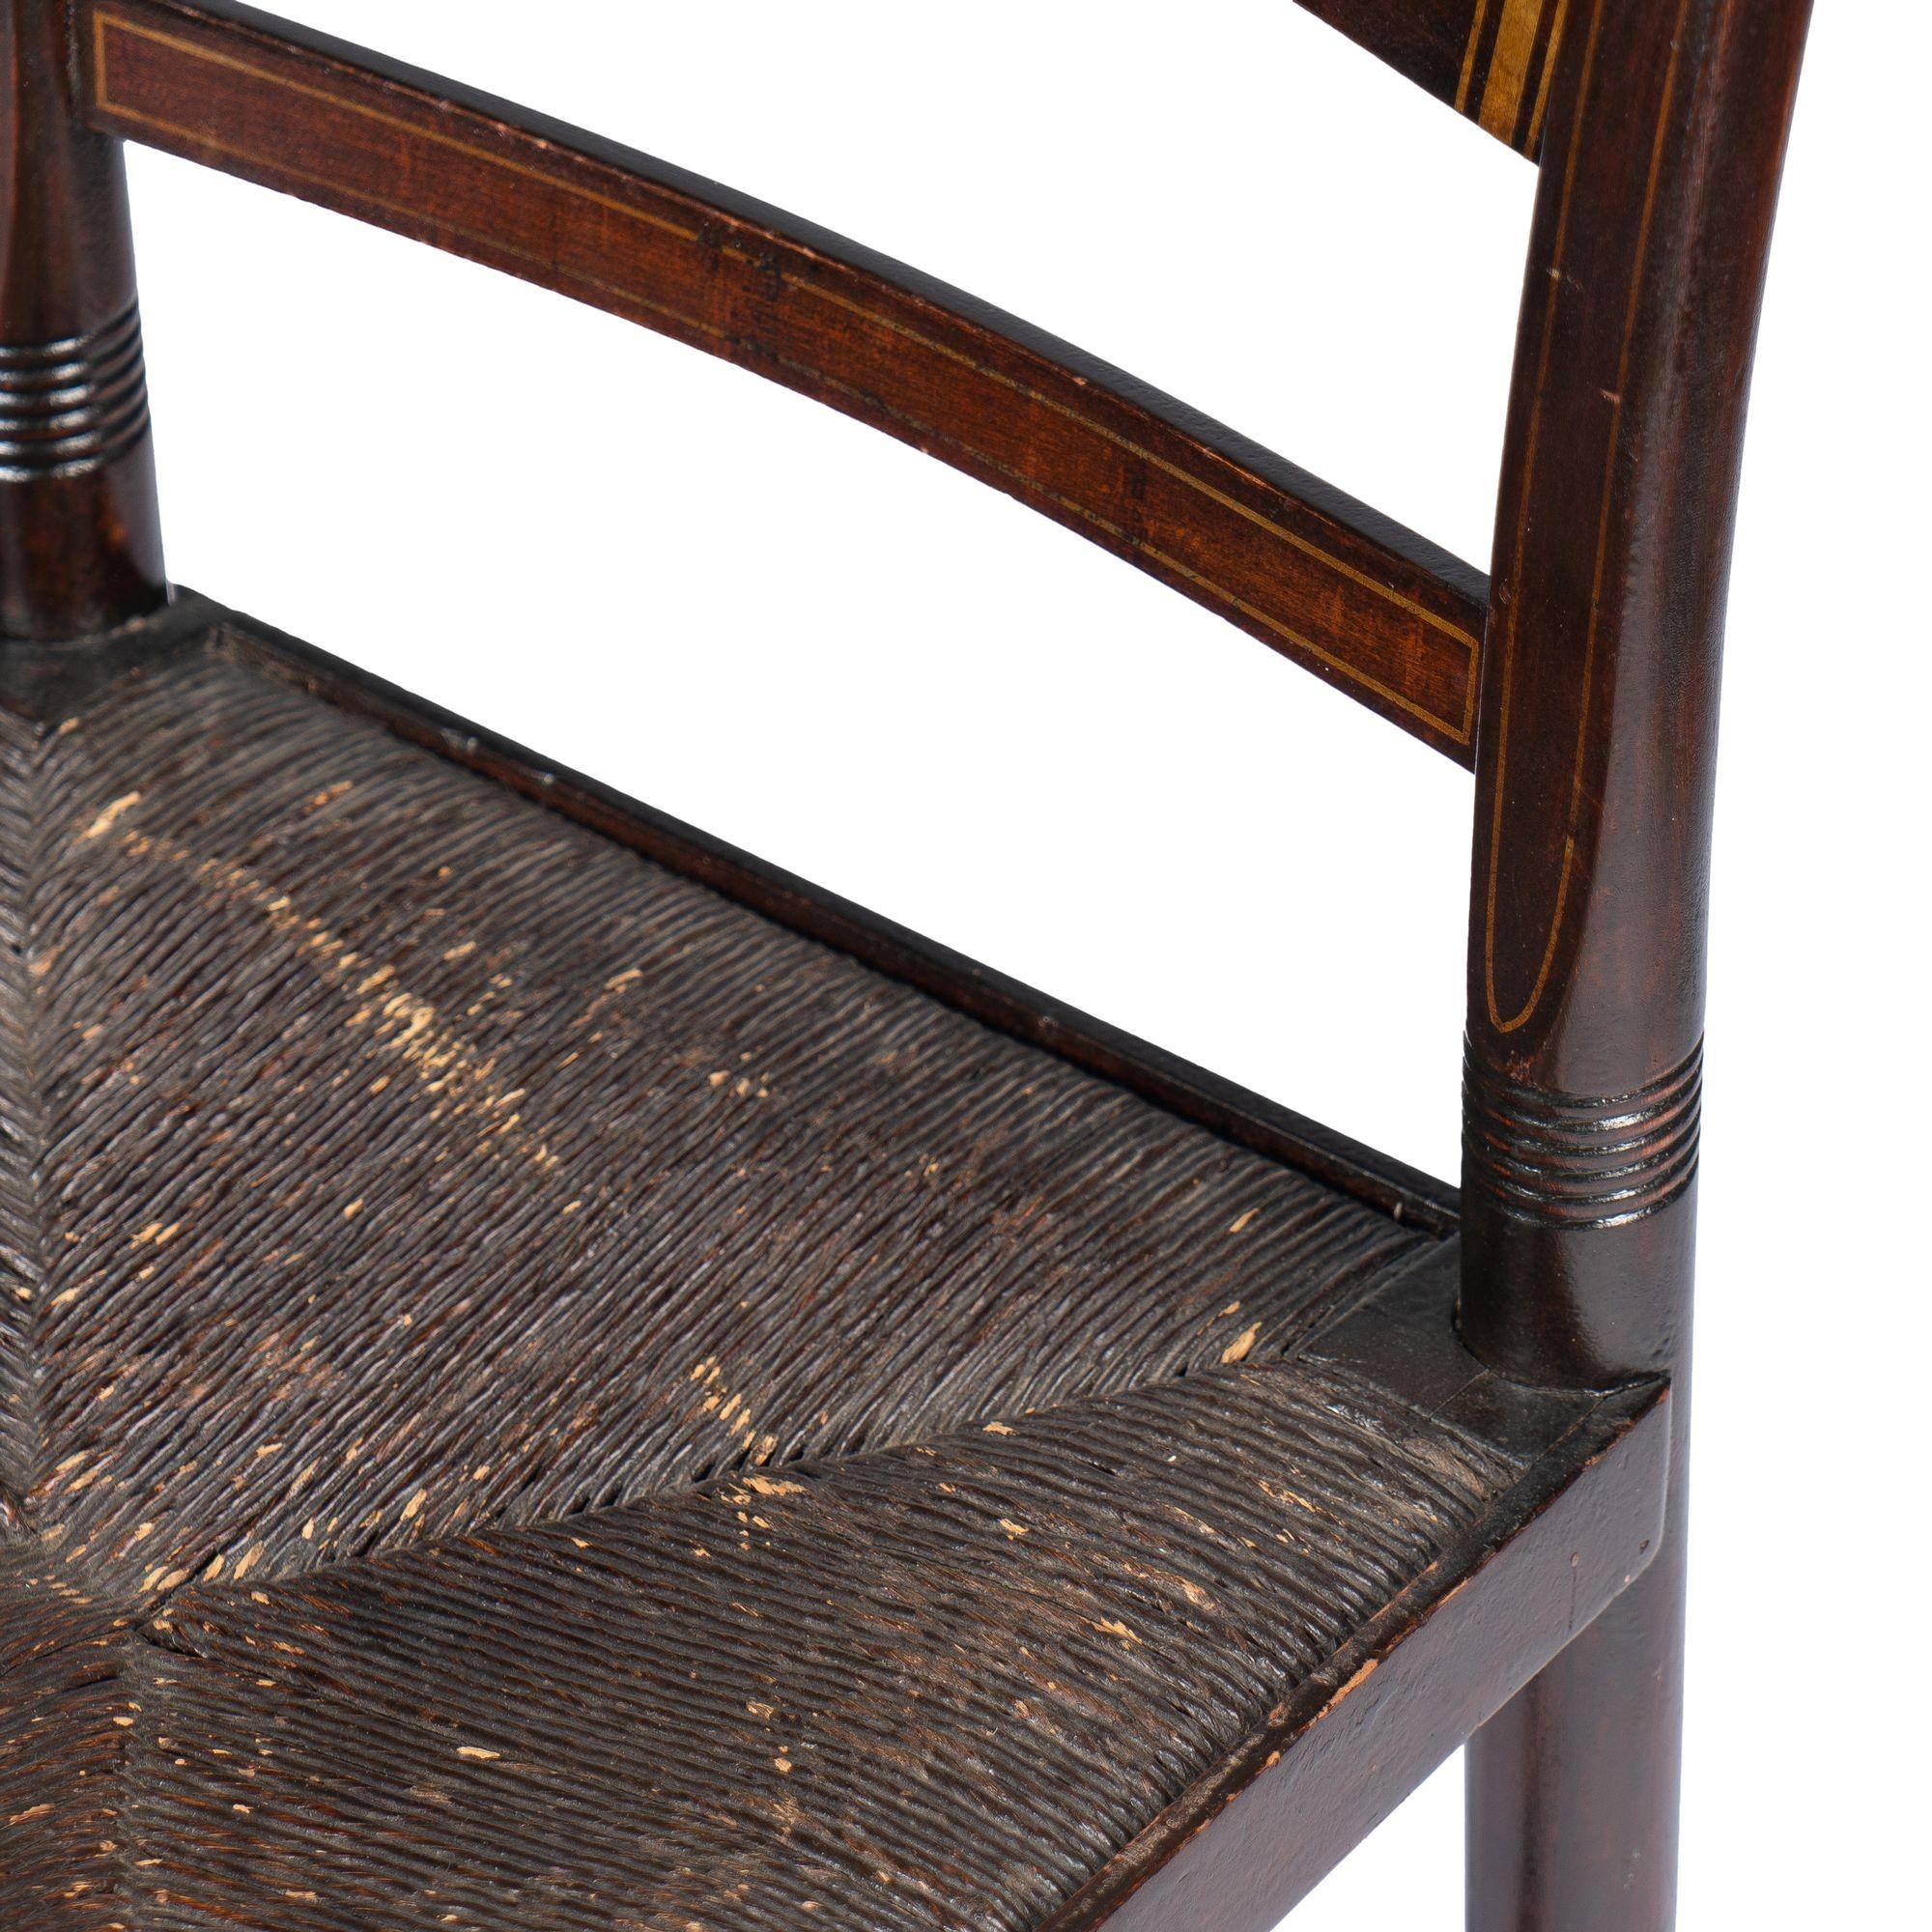 Connecticut Valley Hitchcock rush seat side chair, 1820 For Sale 5